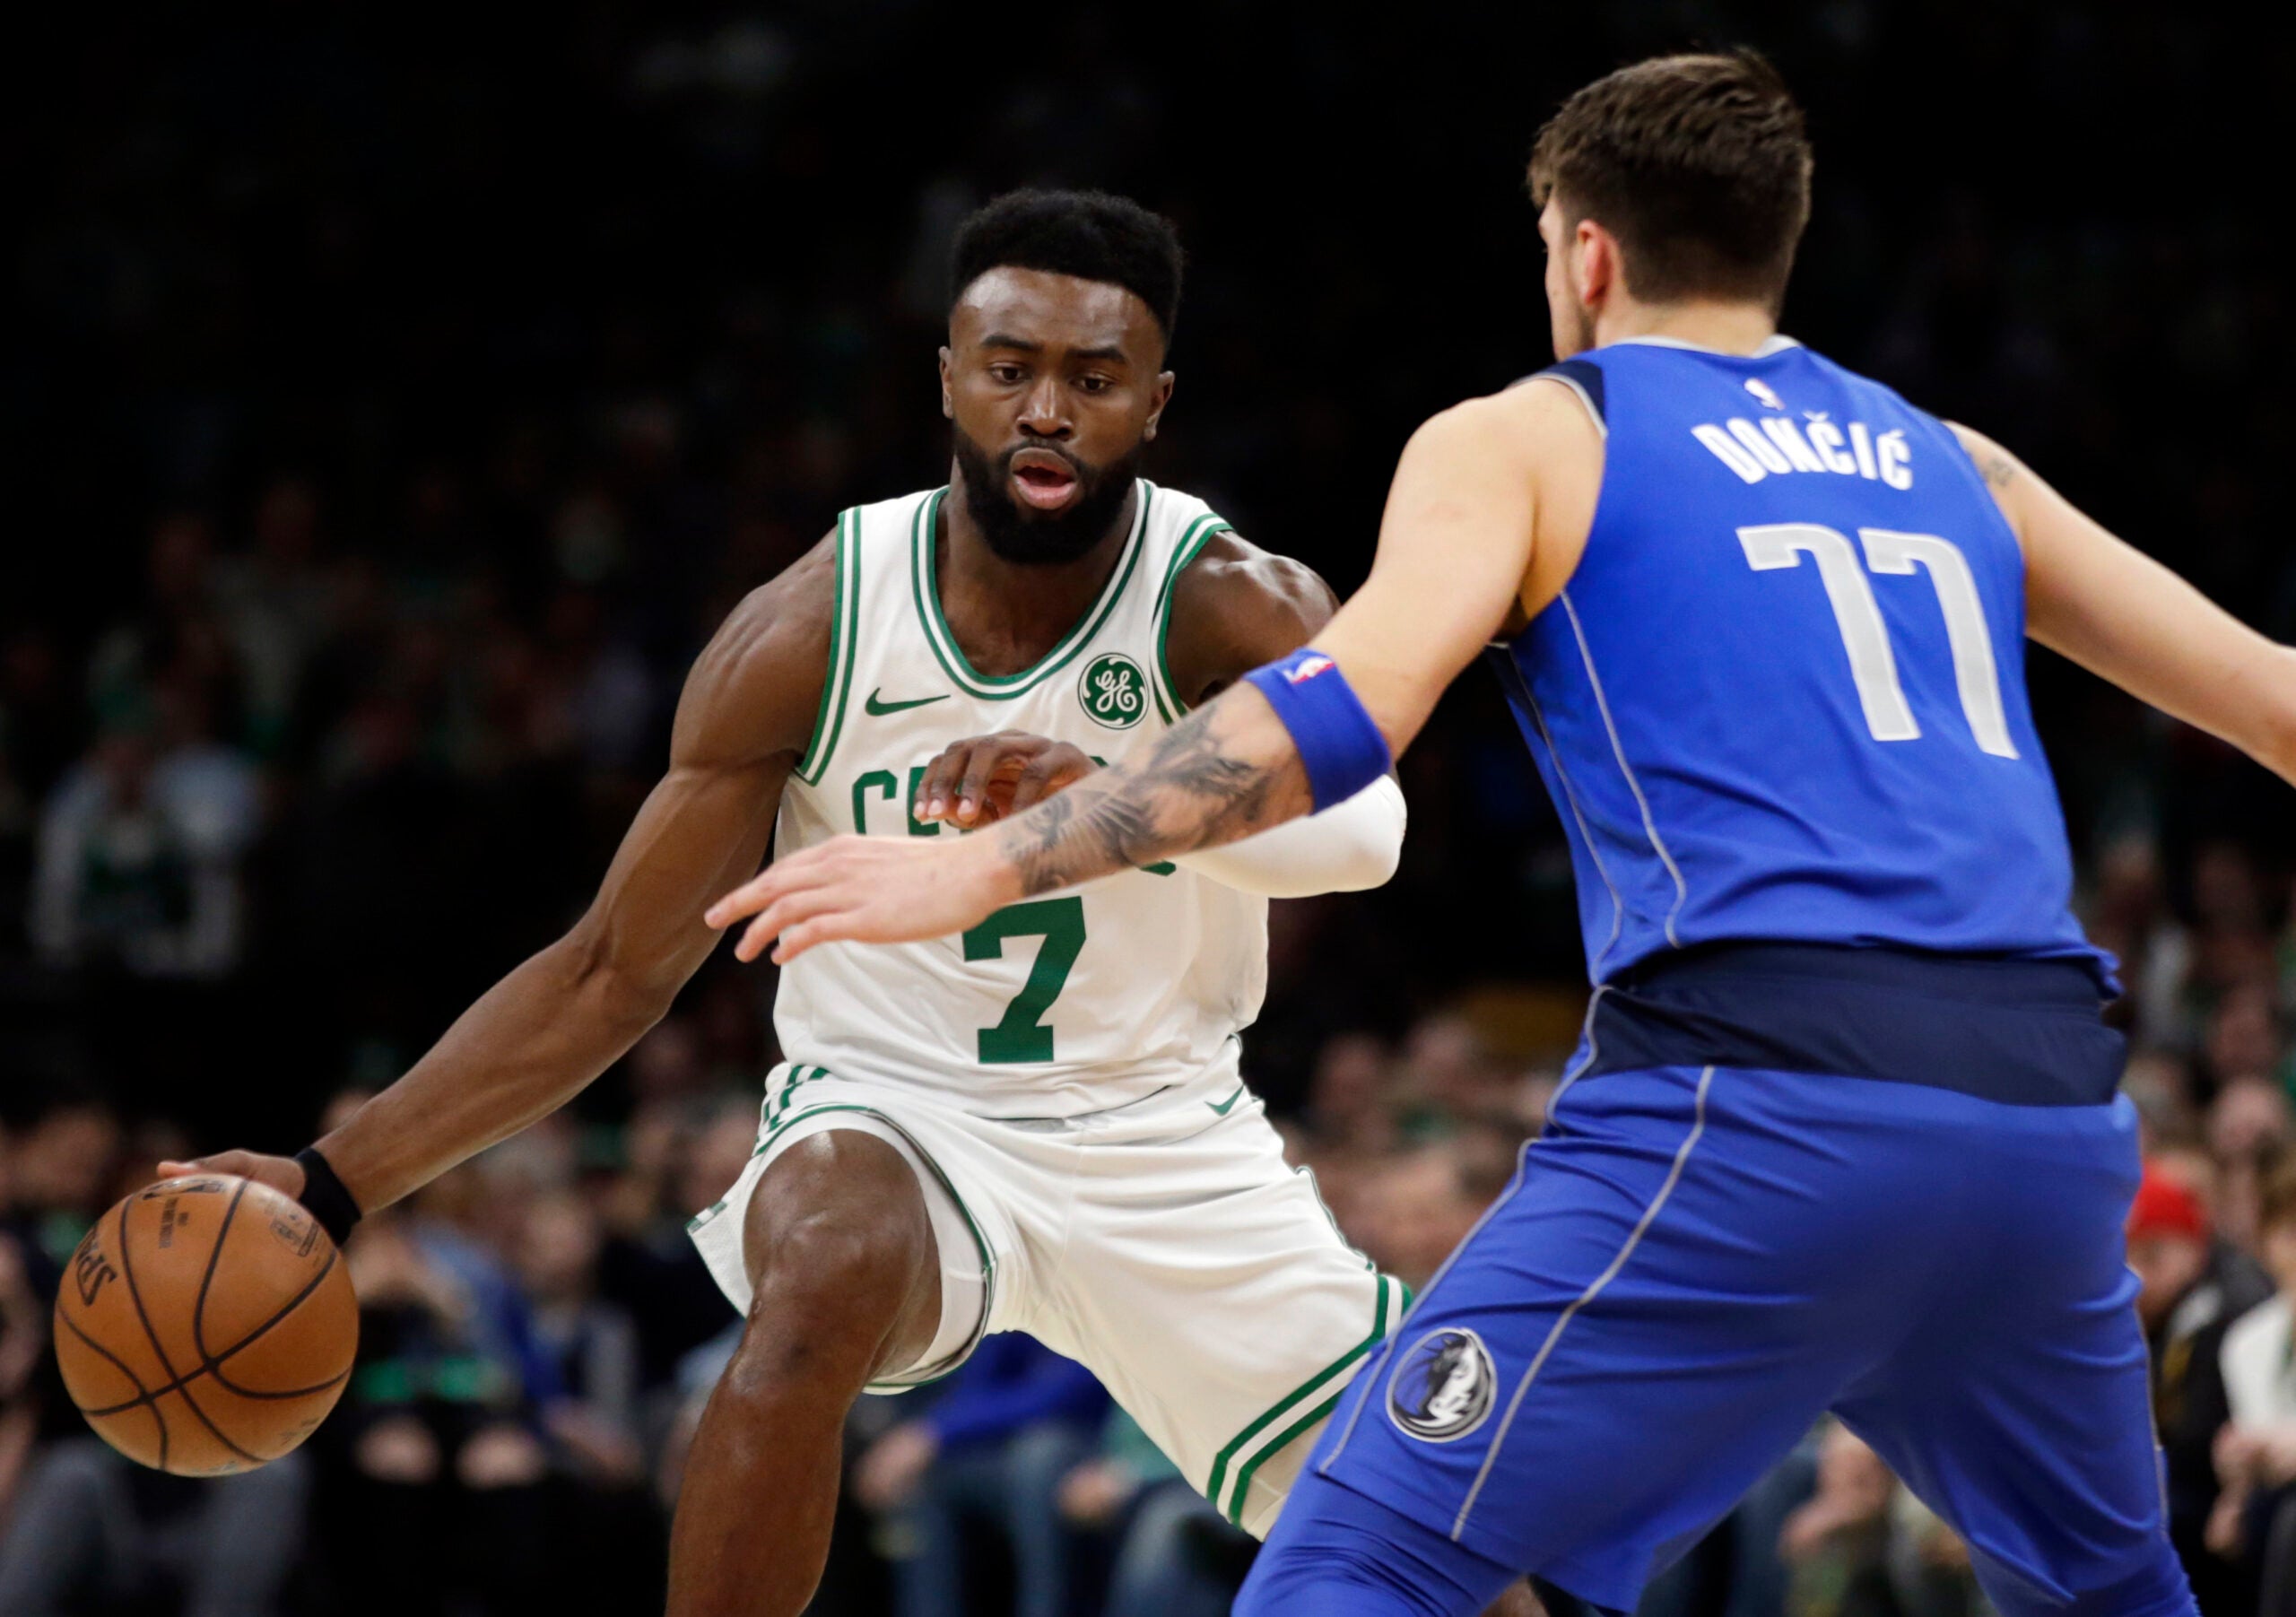 4 takeaways from another encouraging home win for the Celtics